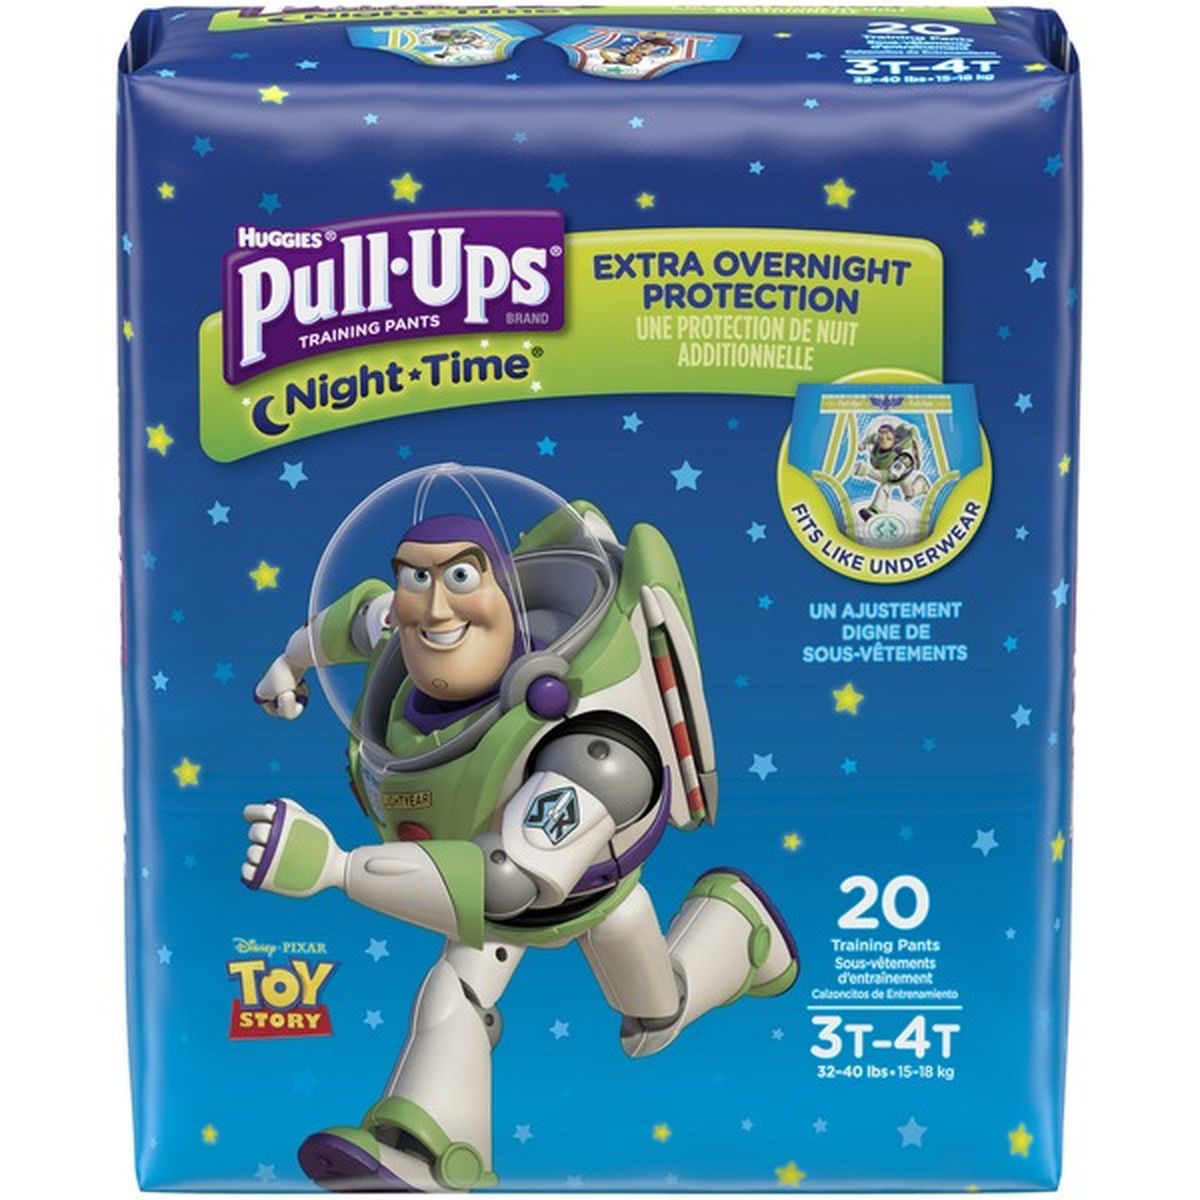 Pull-Ups Learning Designs for Girls Potty Training Pants, 3T-4T (32-40  lbs.), 66 Ct. (Packaging May Vary) : : Baby